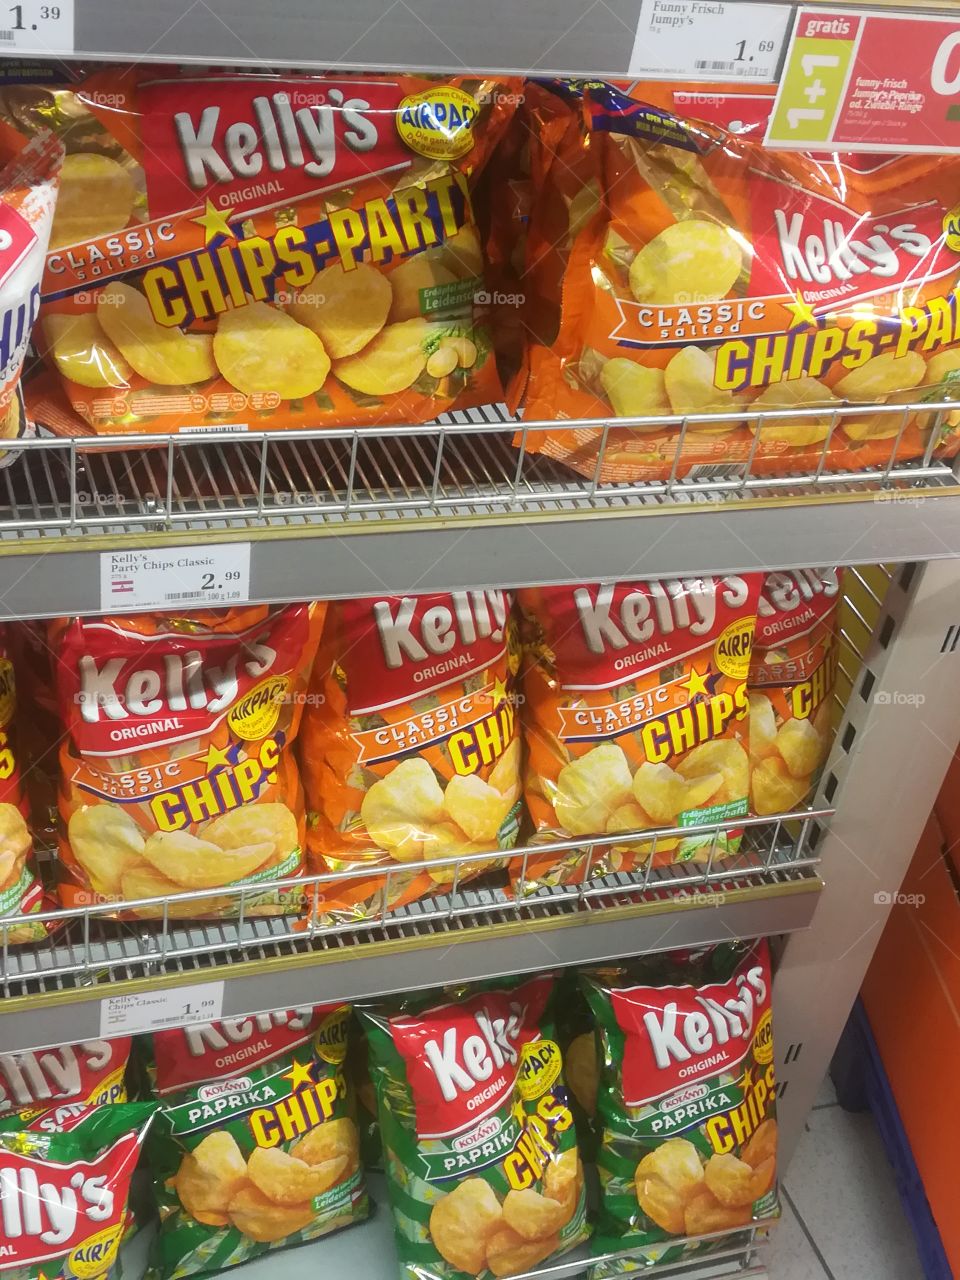 Kelly's chips